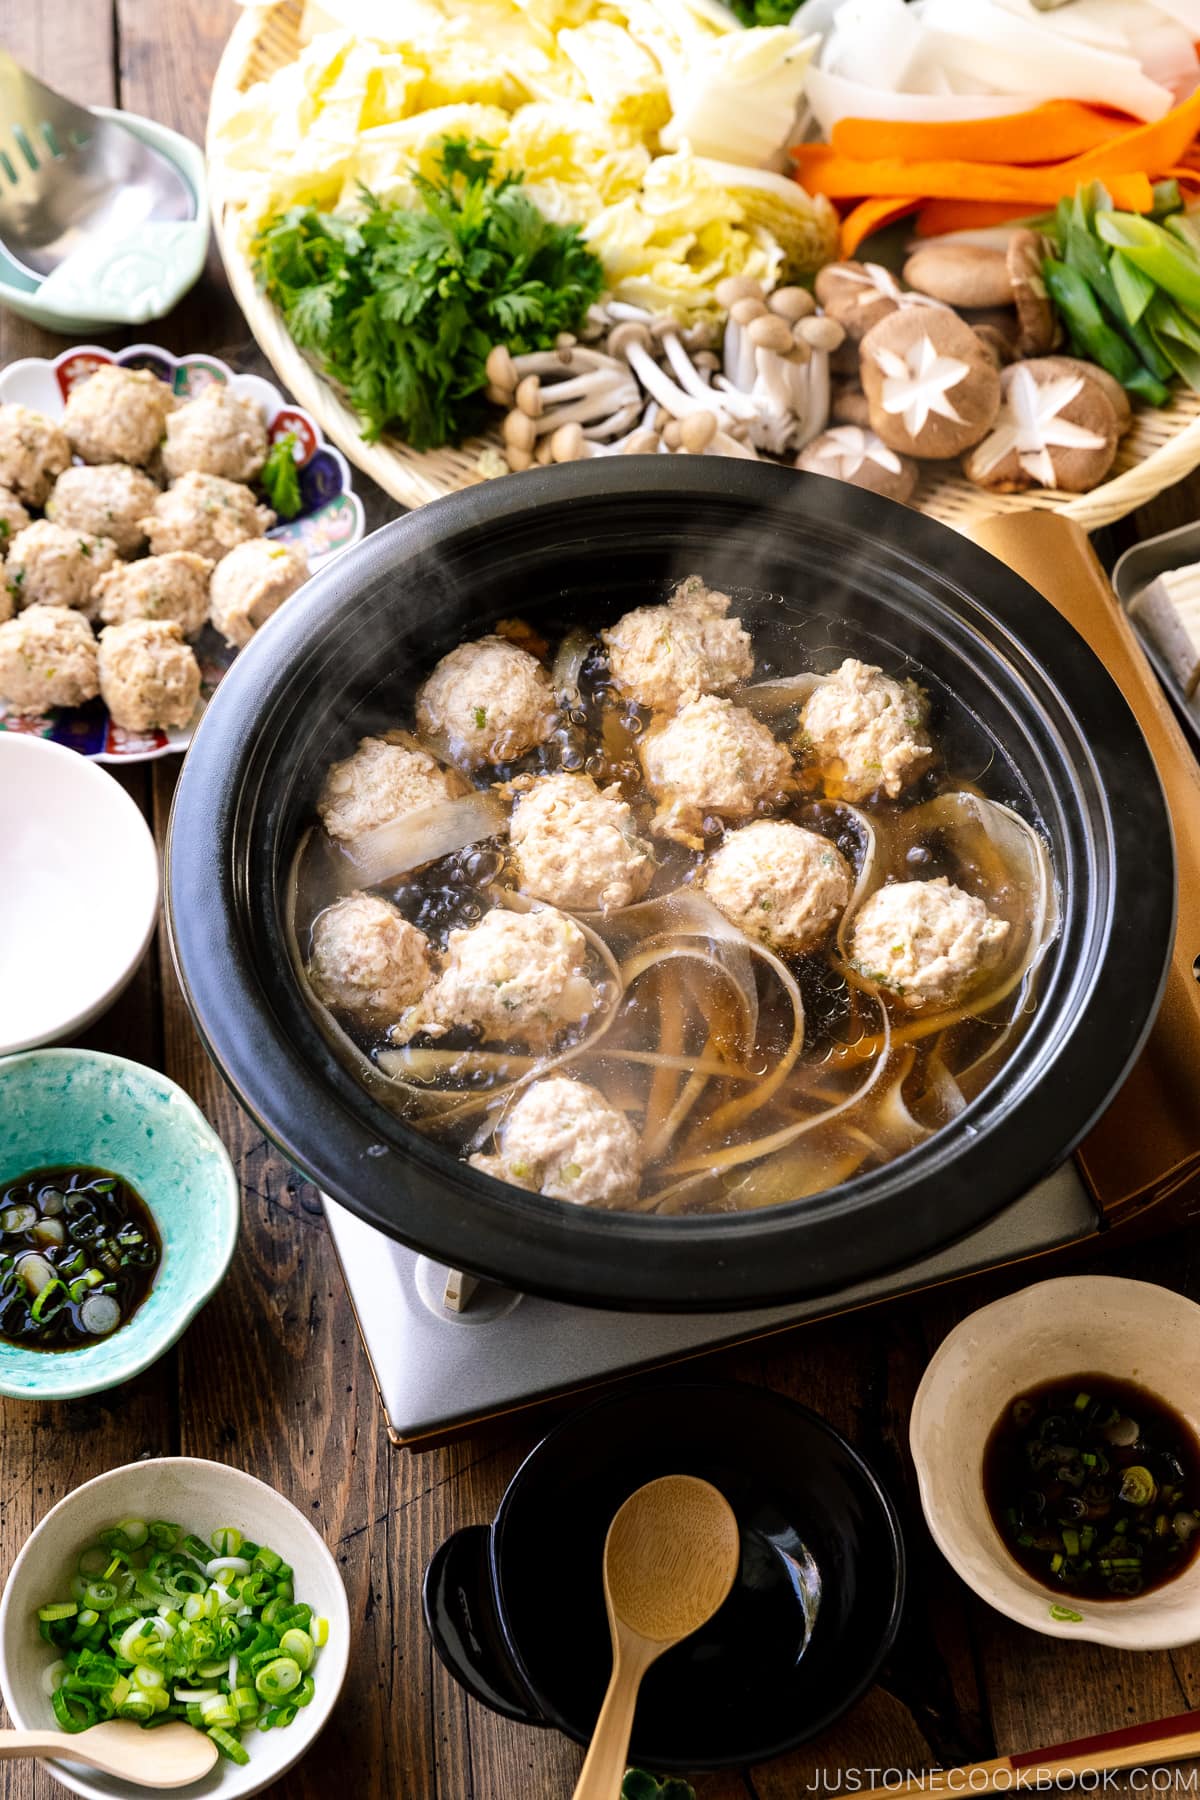 A Japanese clay pot simmering chicken meatballs in a savory dashi broth.